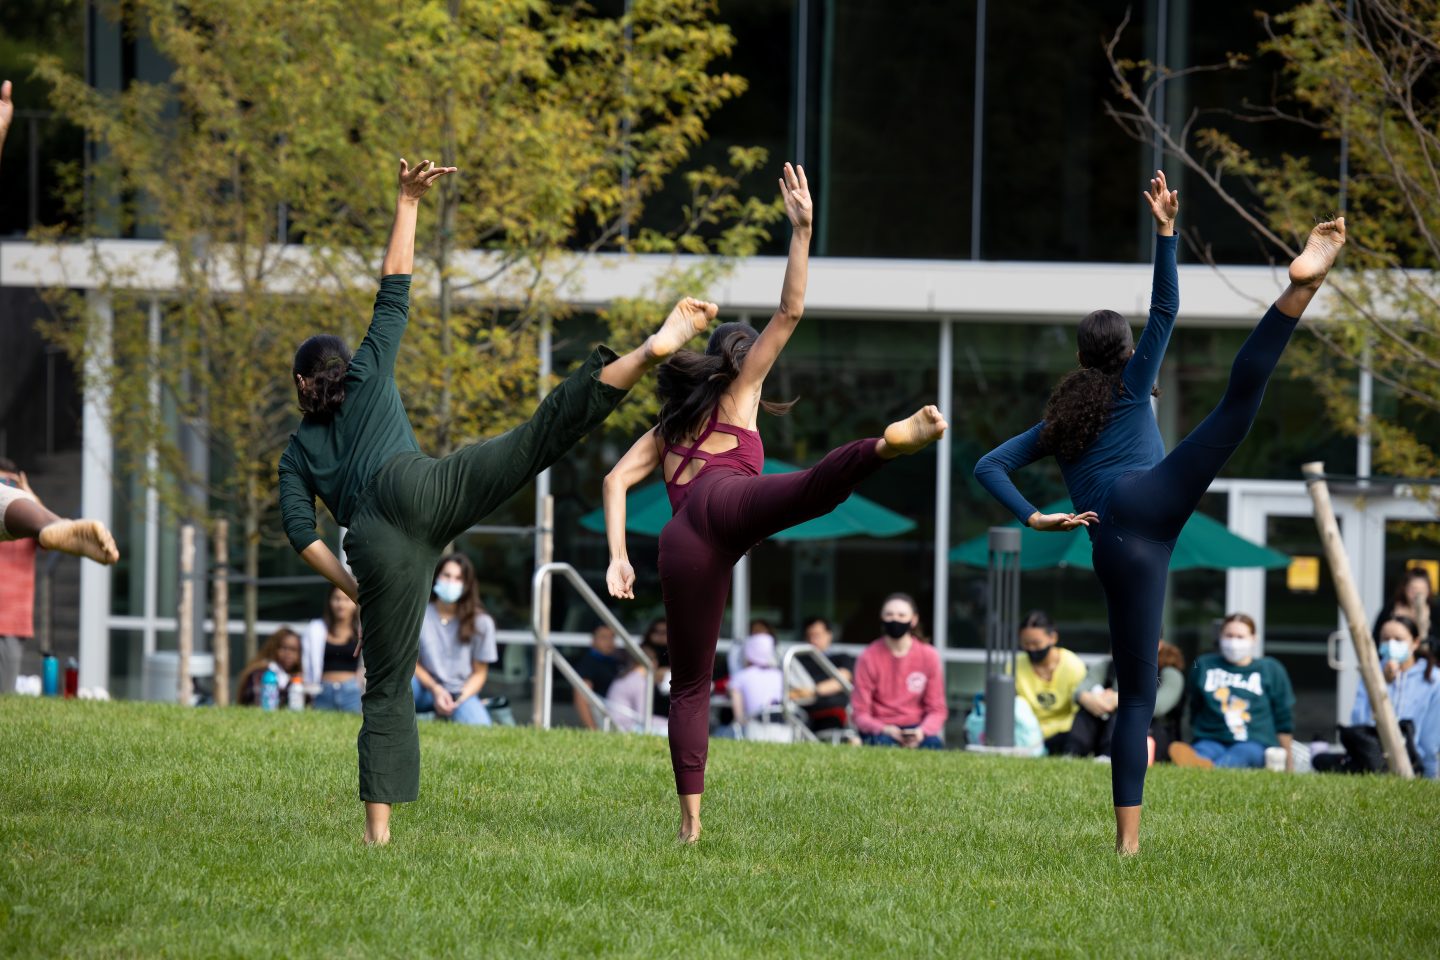 ӰƬ Dance students perform on the lawn during the 2021 Fall Arts Festival.